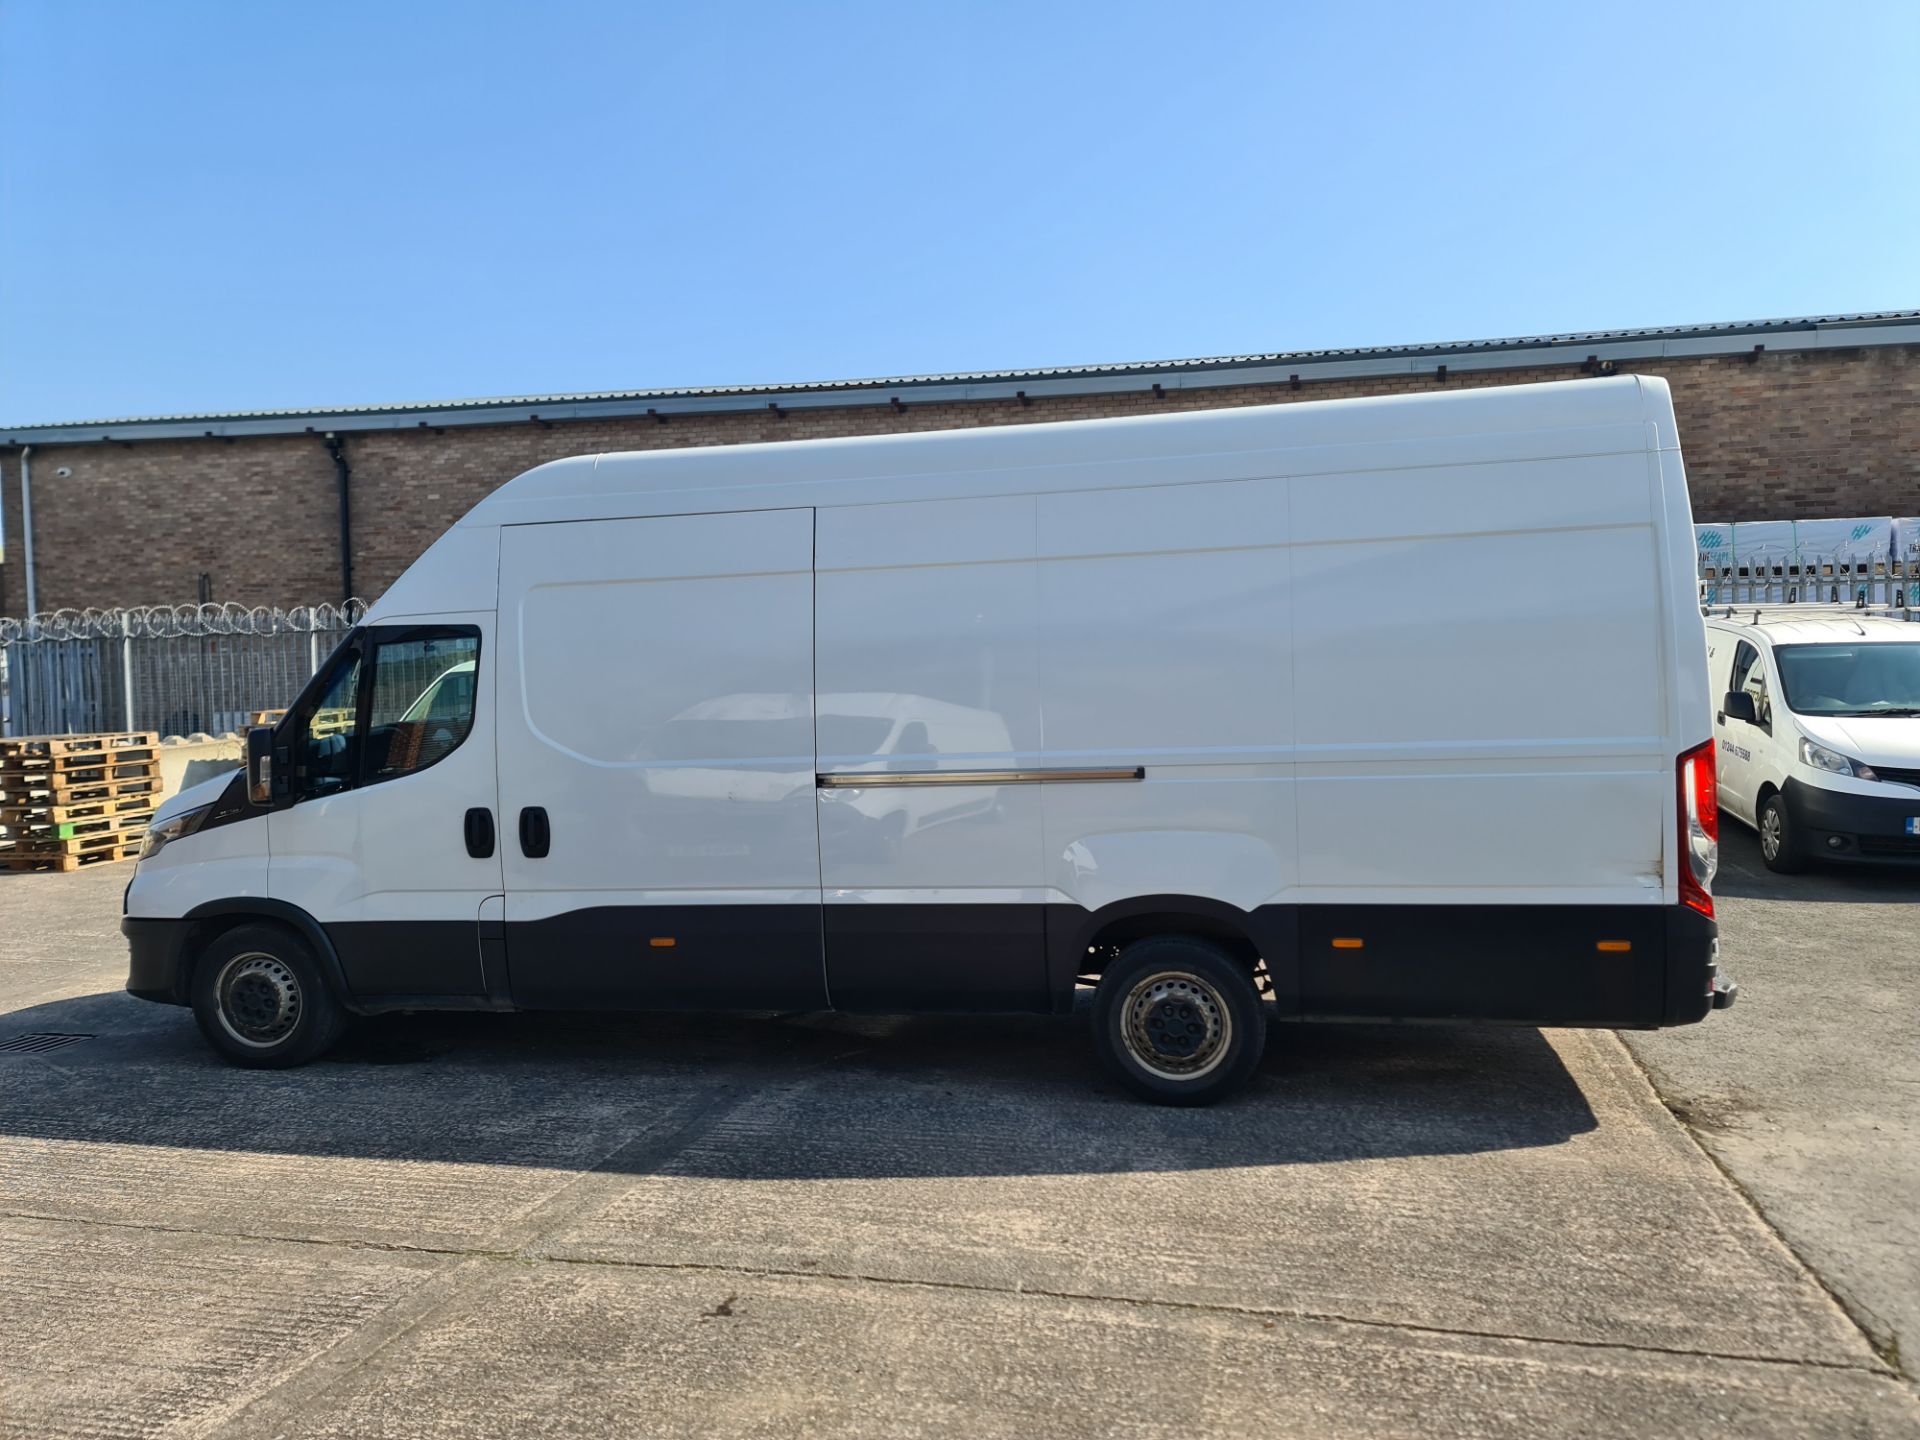 2020 Iveco Daily LWB high roof panel van - Image 4 of 21